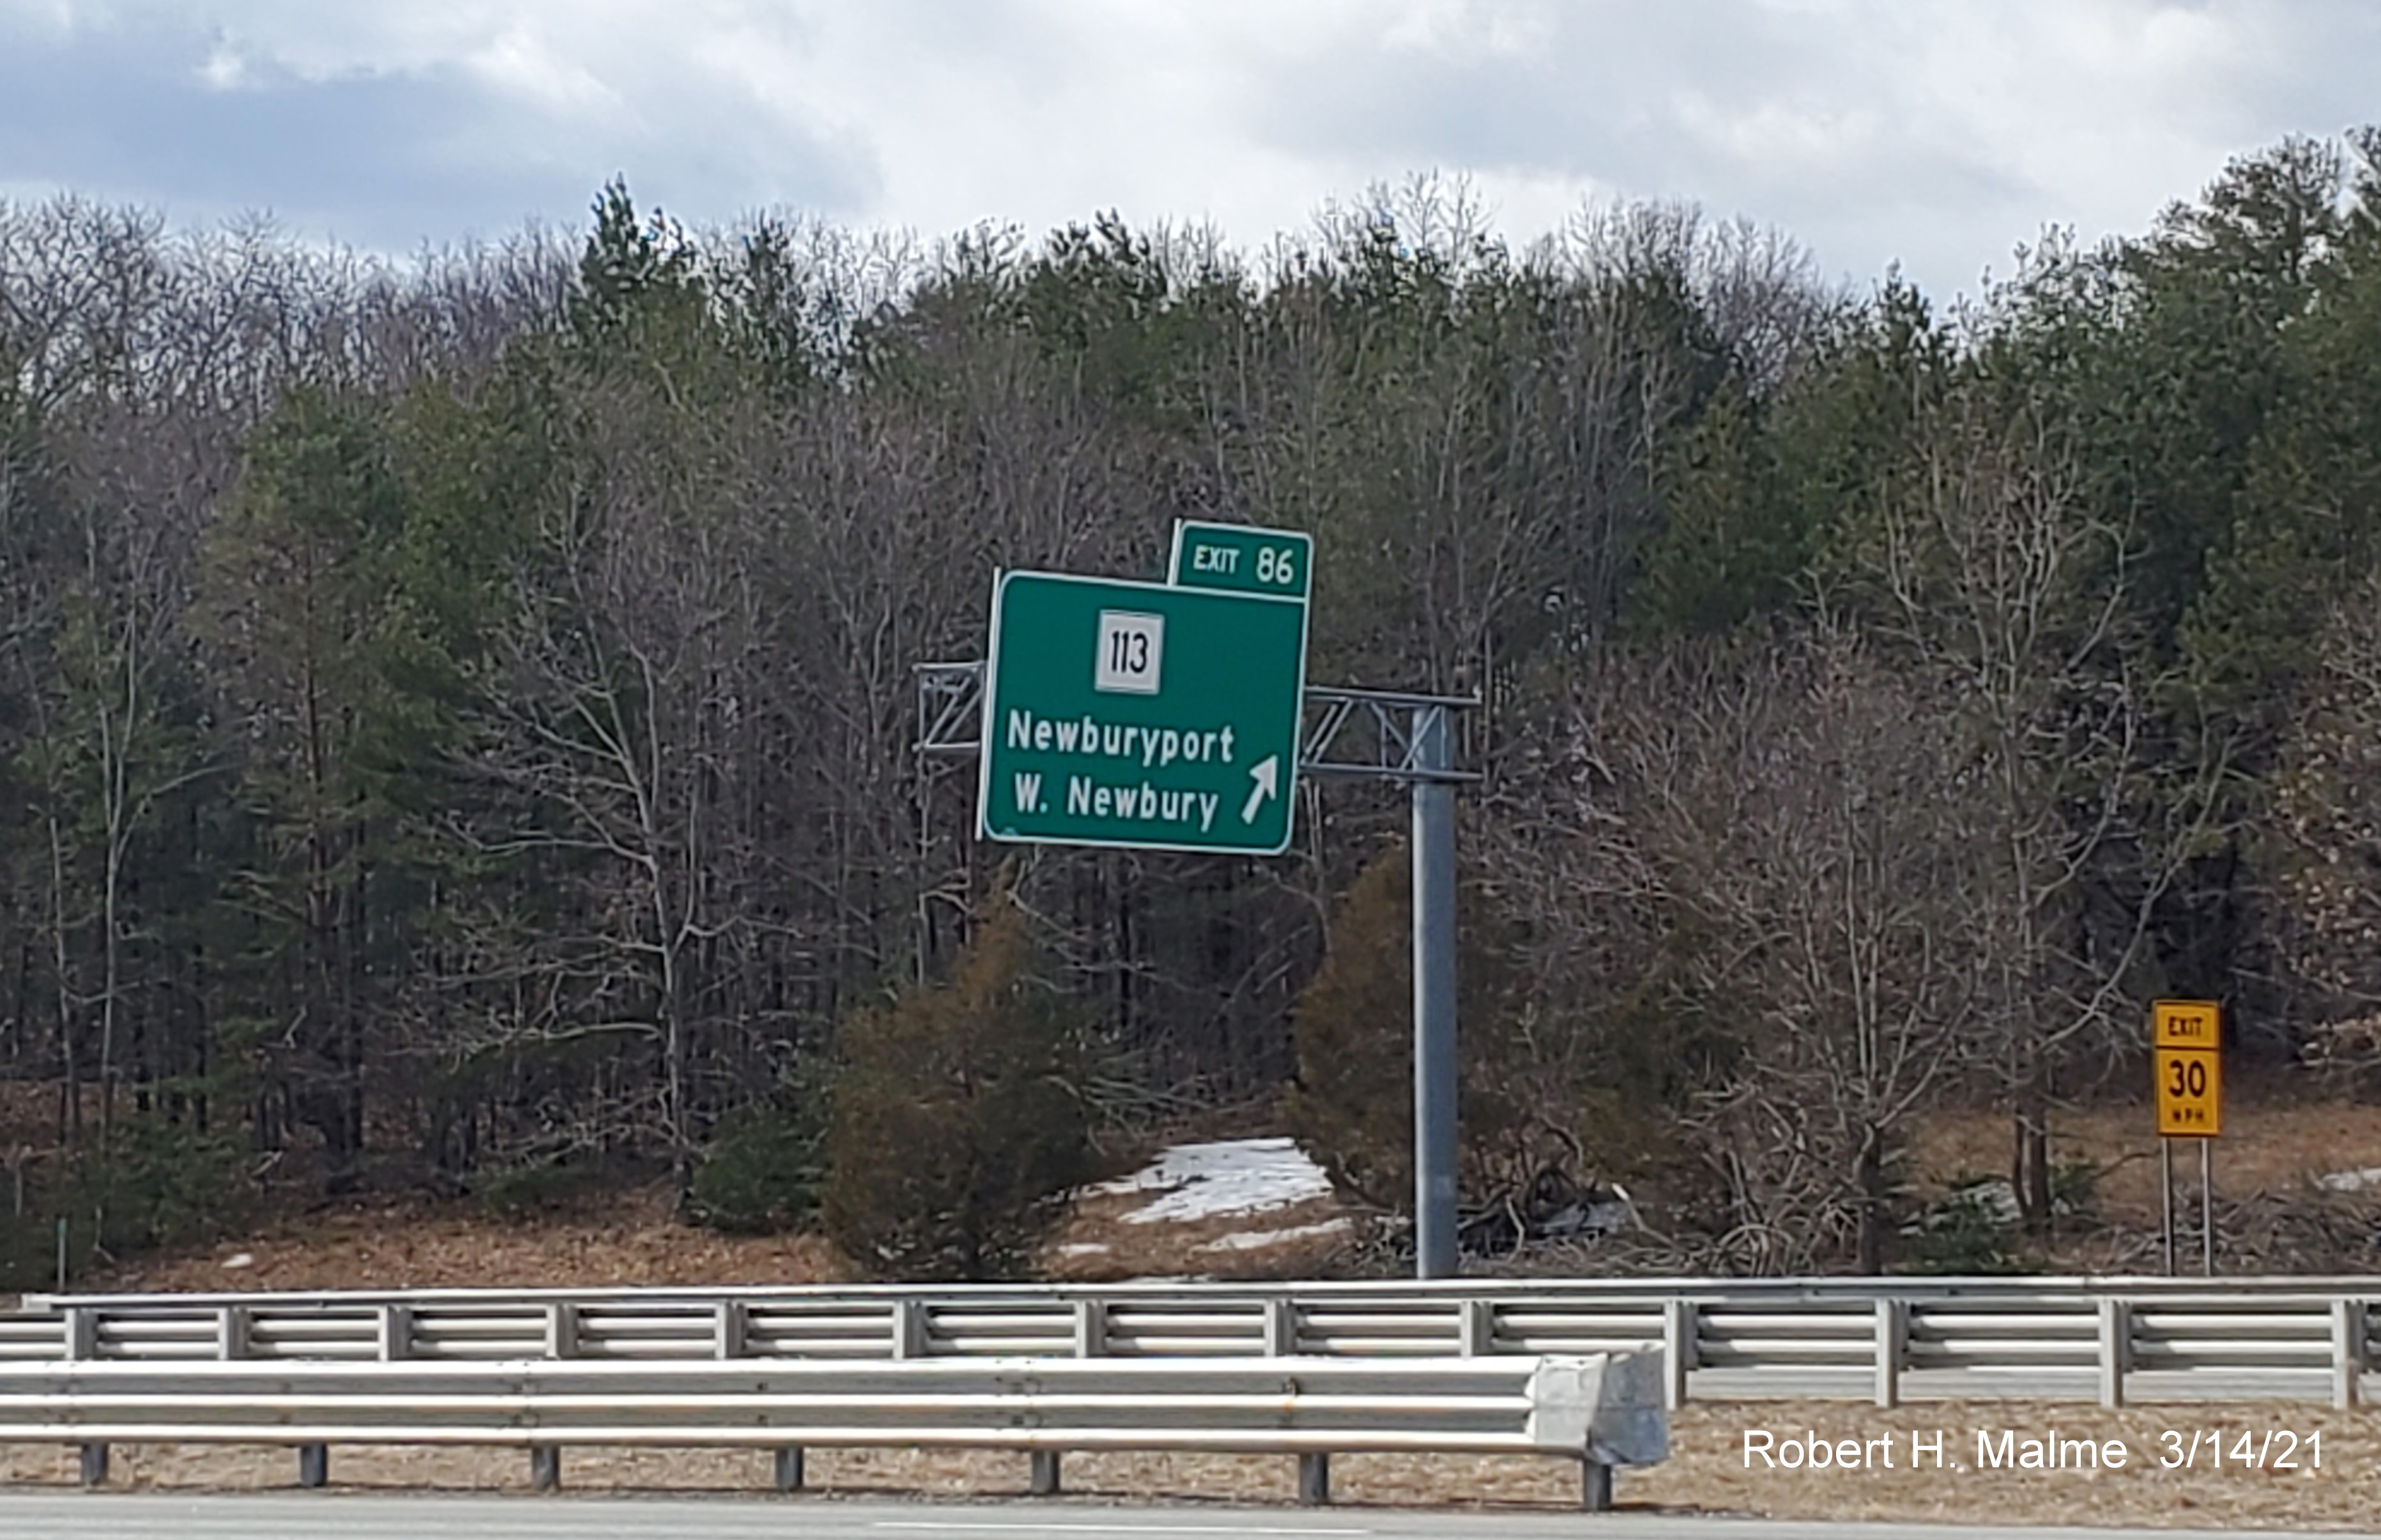 Image of overhead ramp sign for MA 113 exit with new milepost based exit number on I-95 South in Newburyport, March 2021